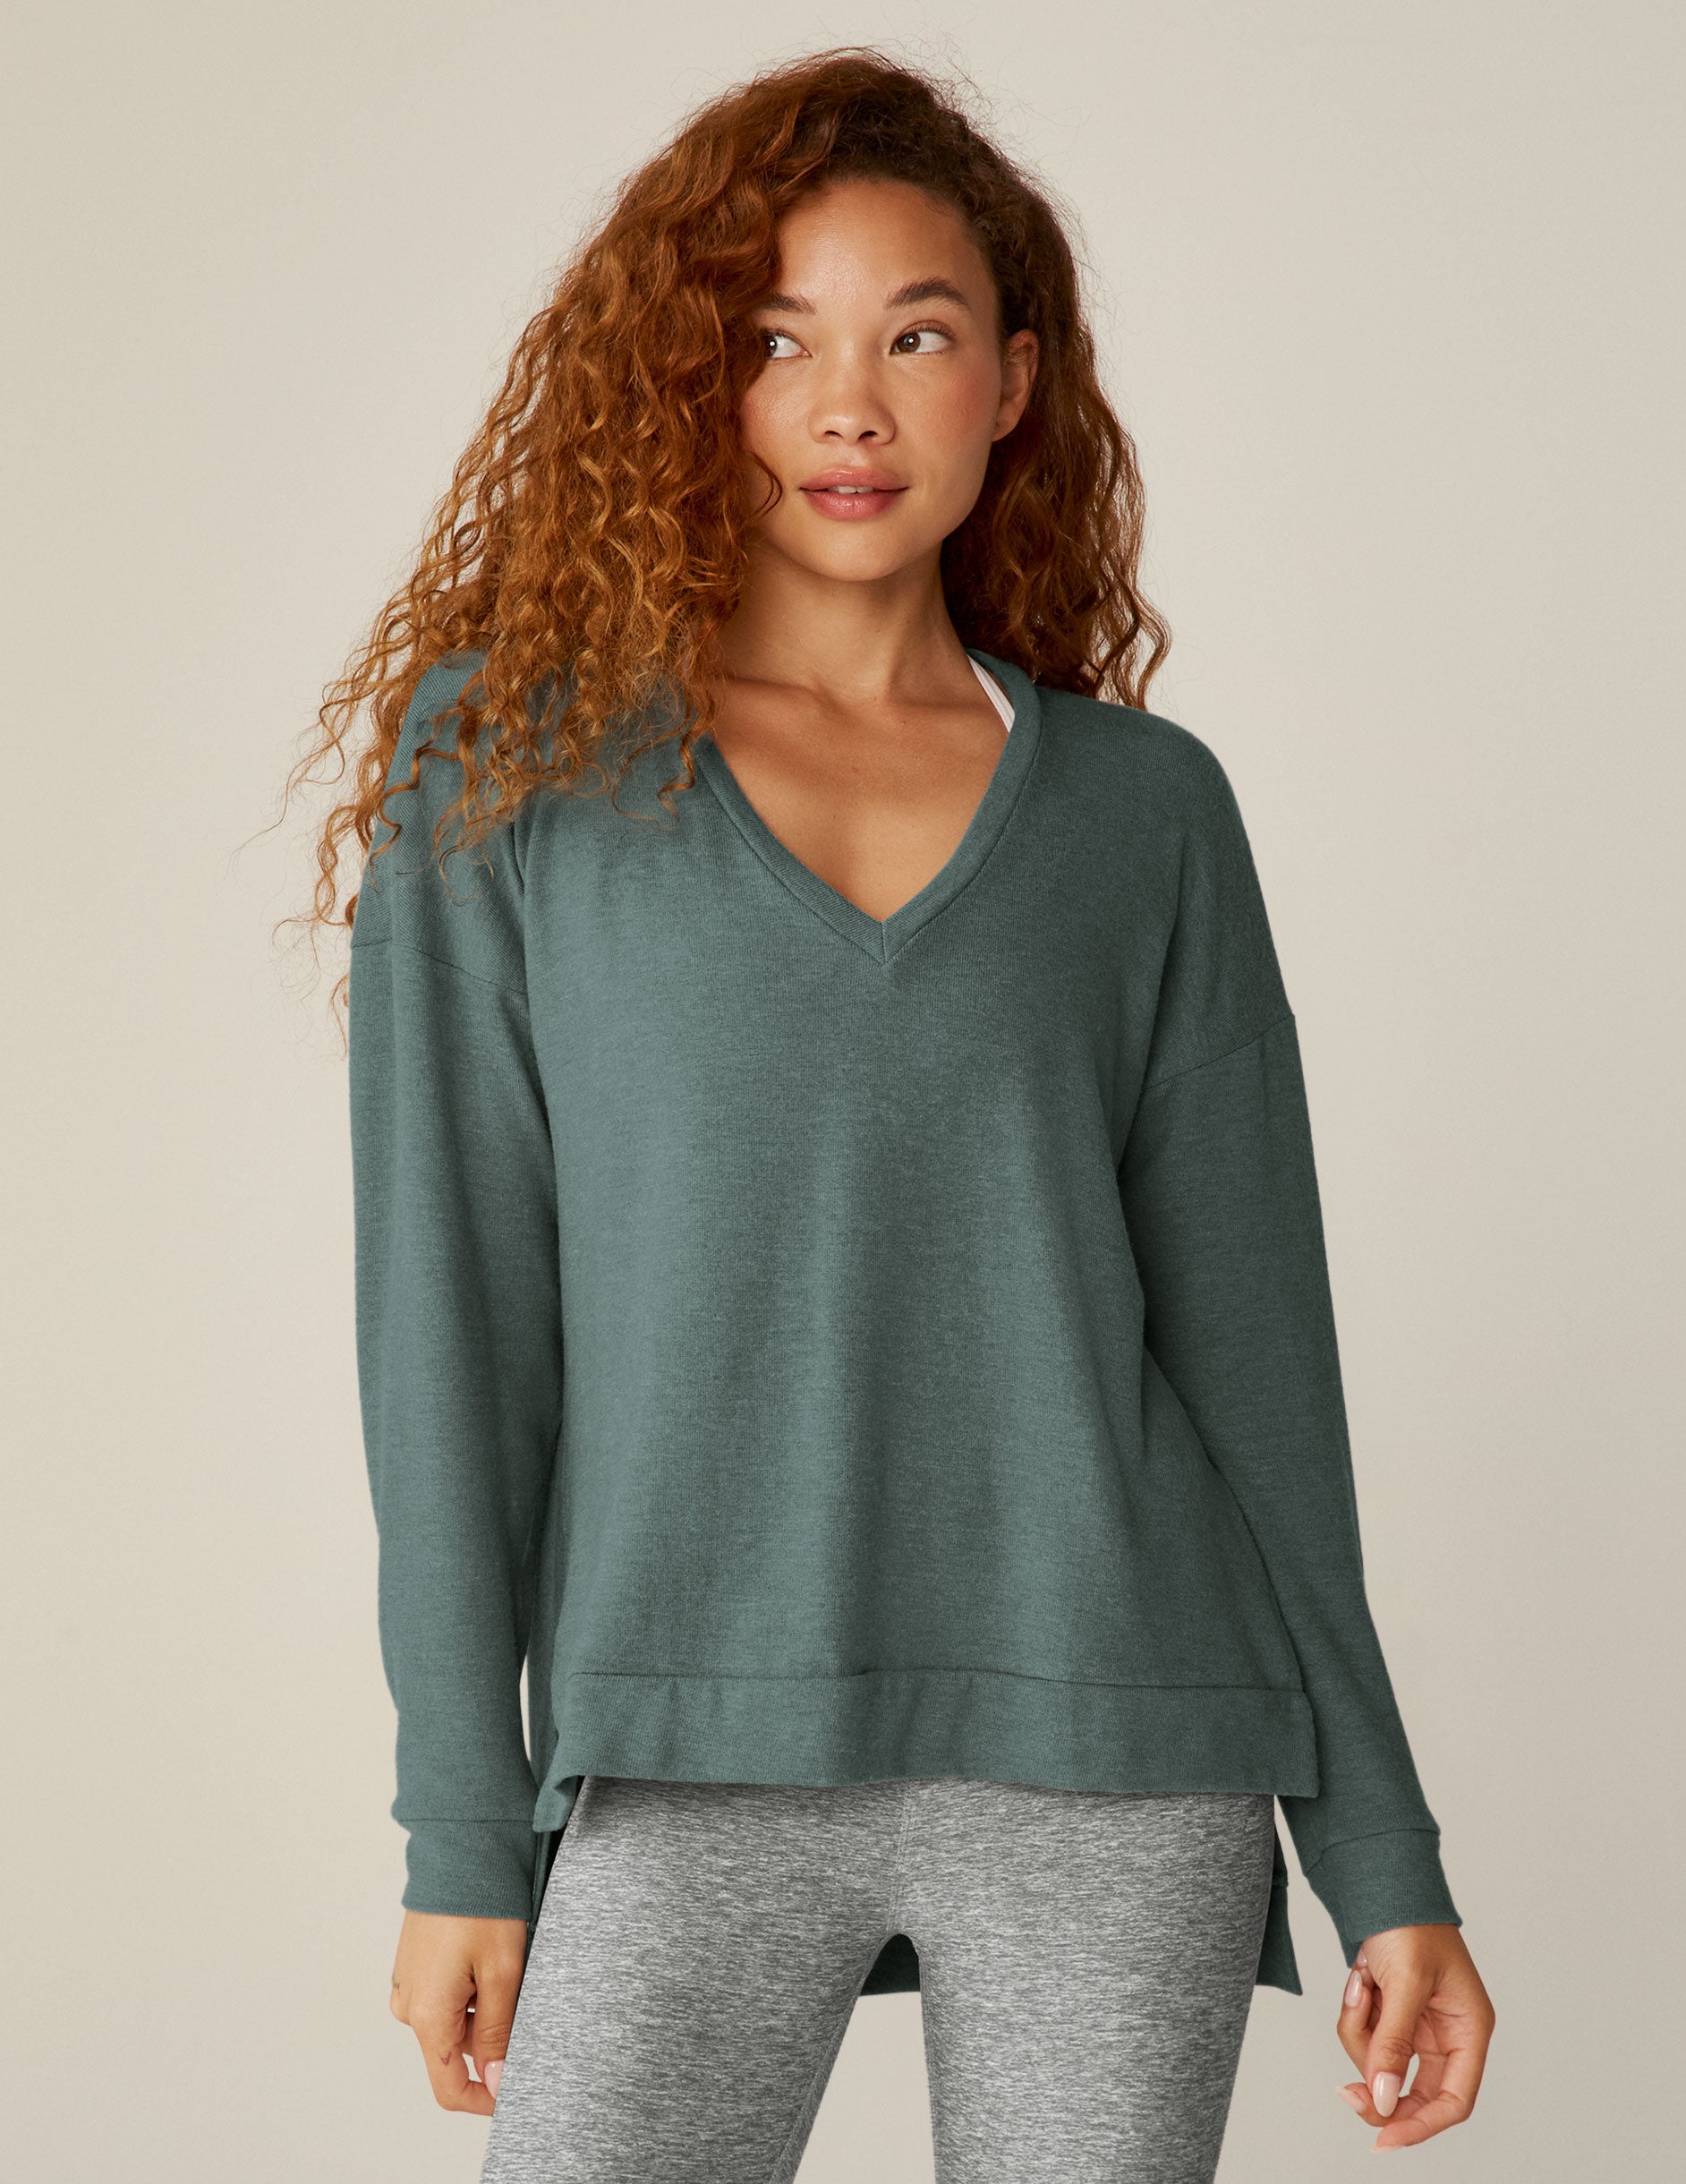 blue v-neck pullover sweater with a high-low detail at waistband and side slits. 